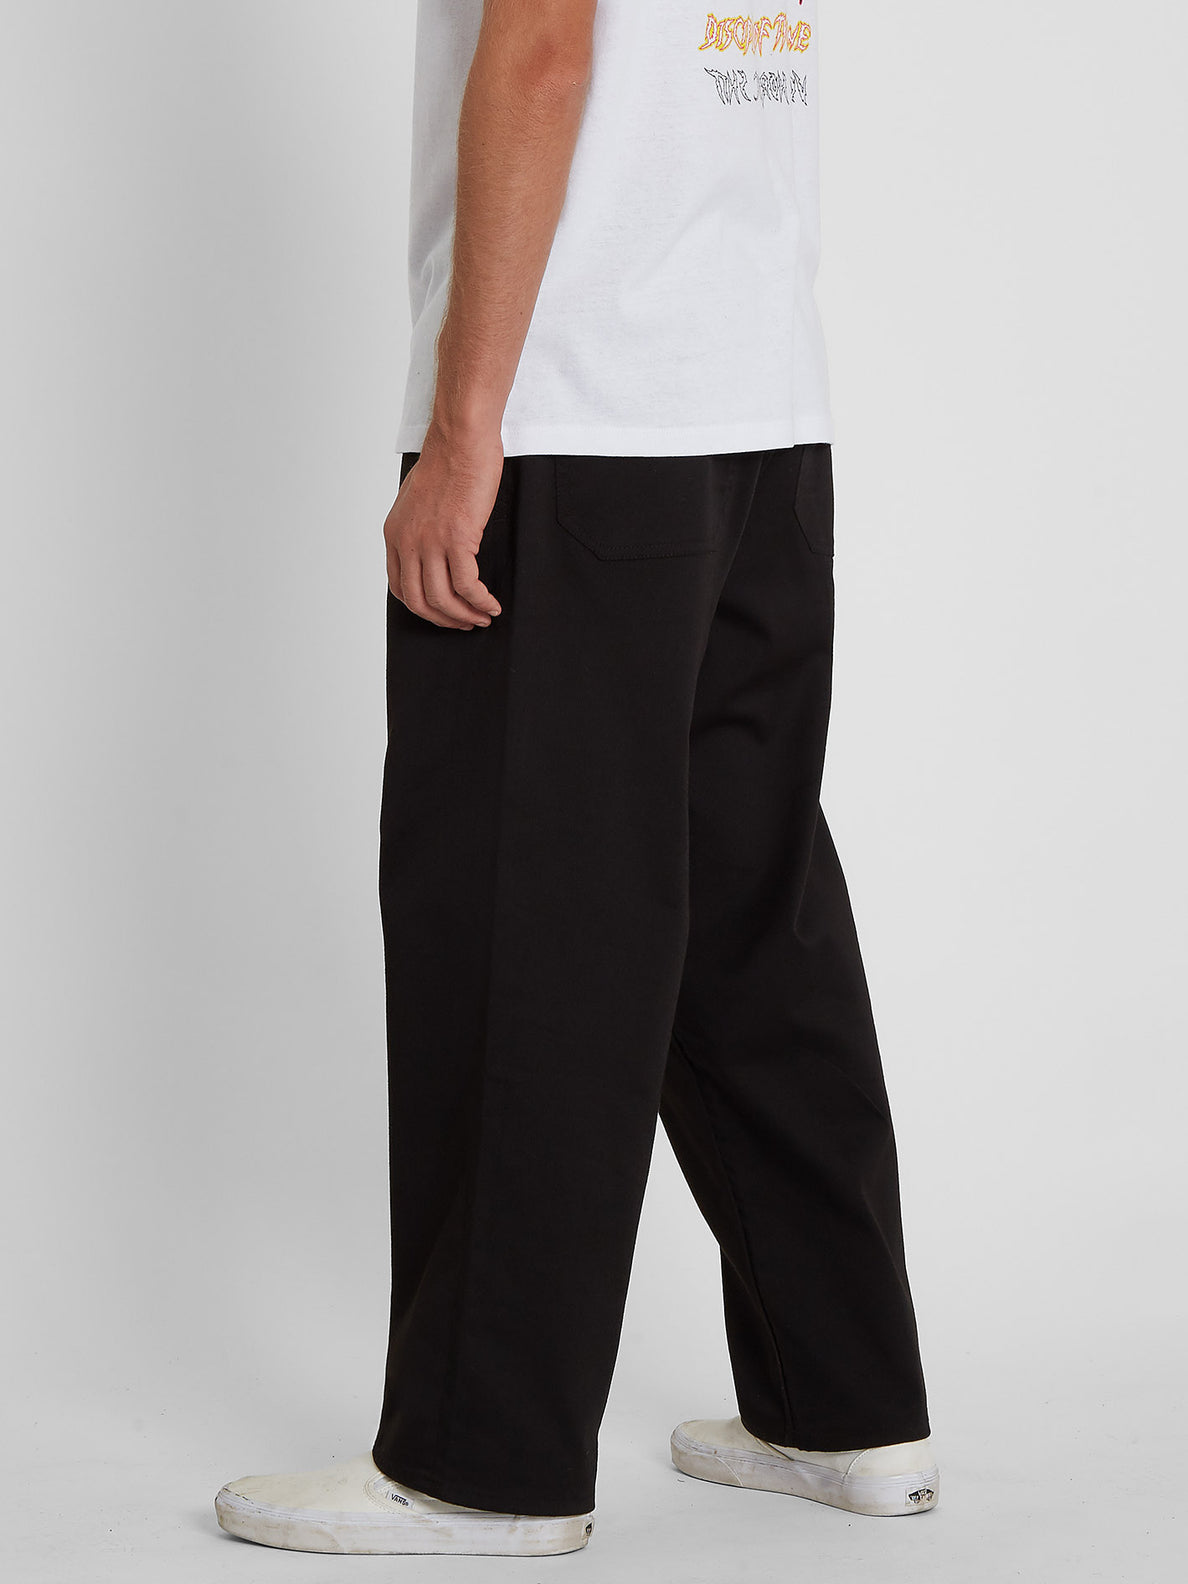 Outer Spaced Solid Pant - BLACK (A1242004_BLK) [3]